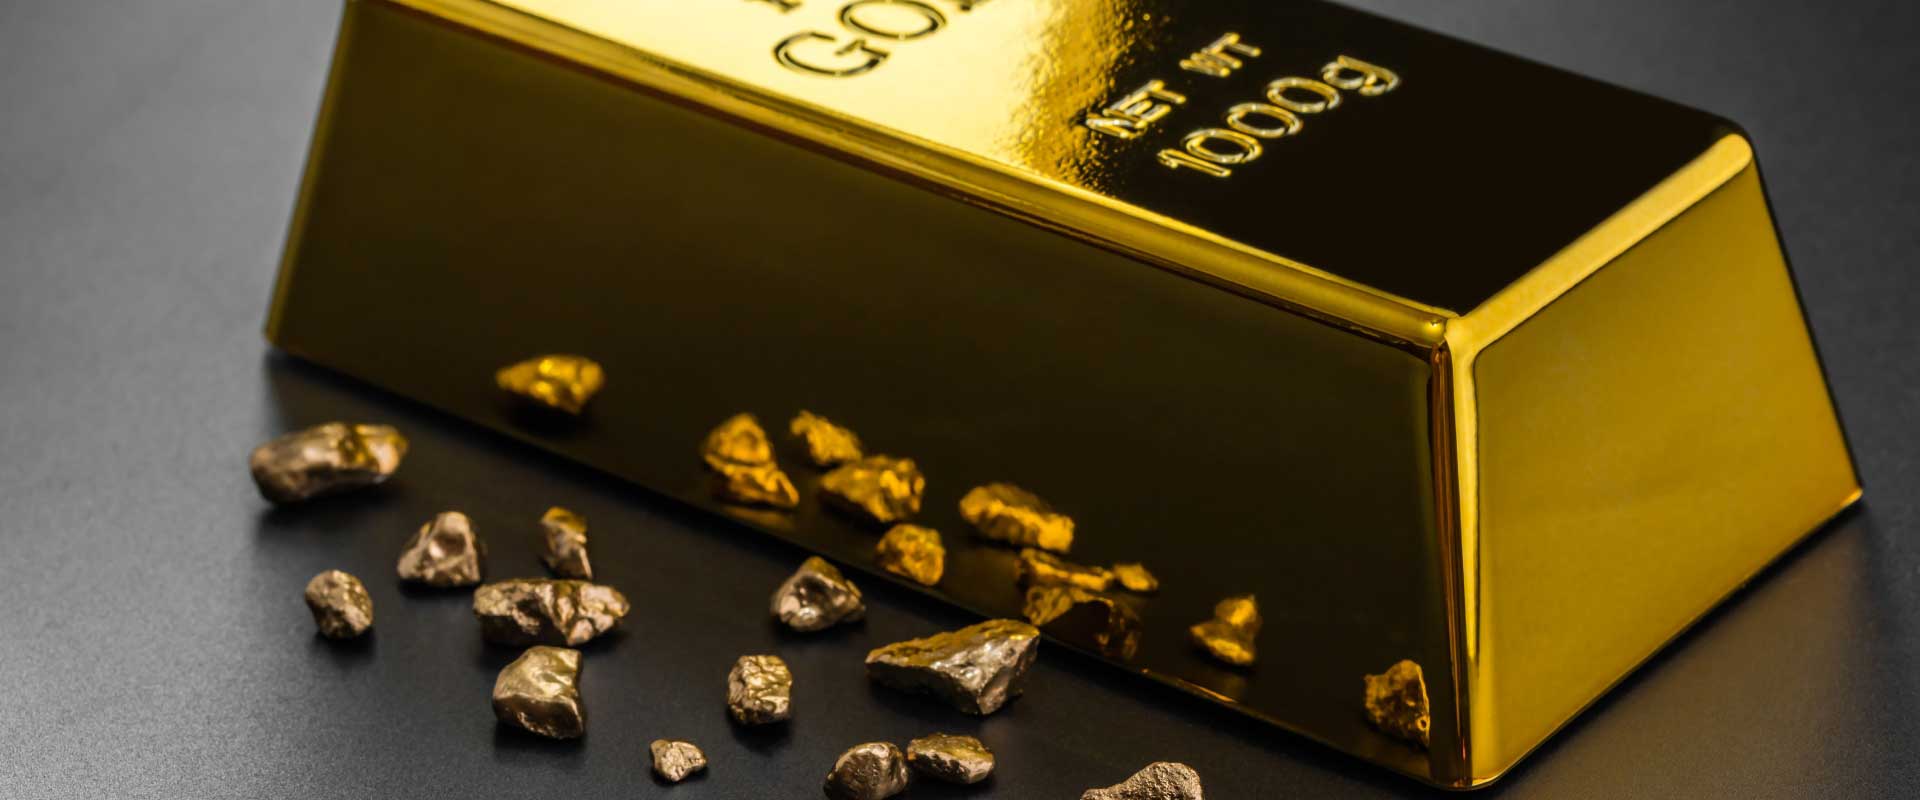 gold nuggets and one kilogram of gold bar